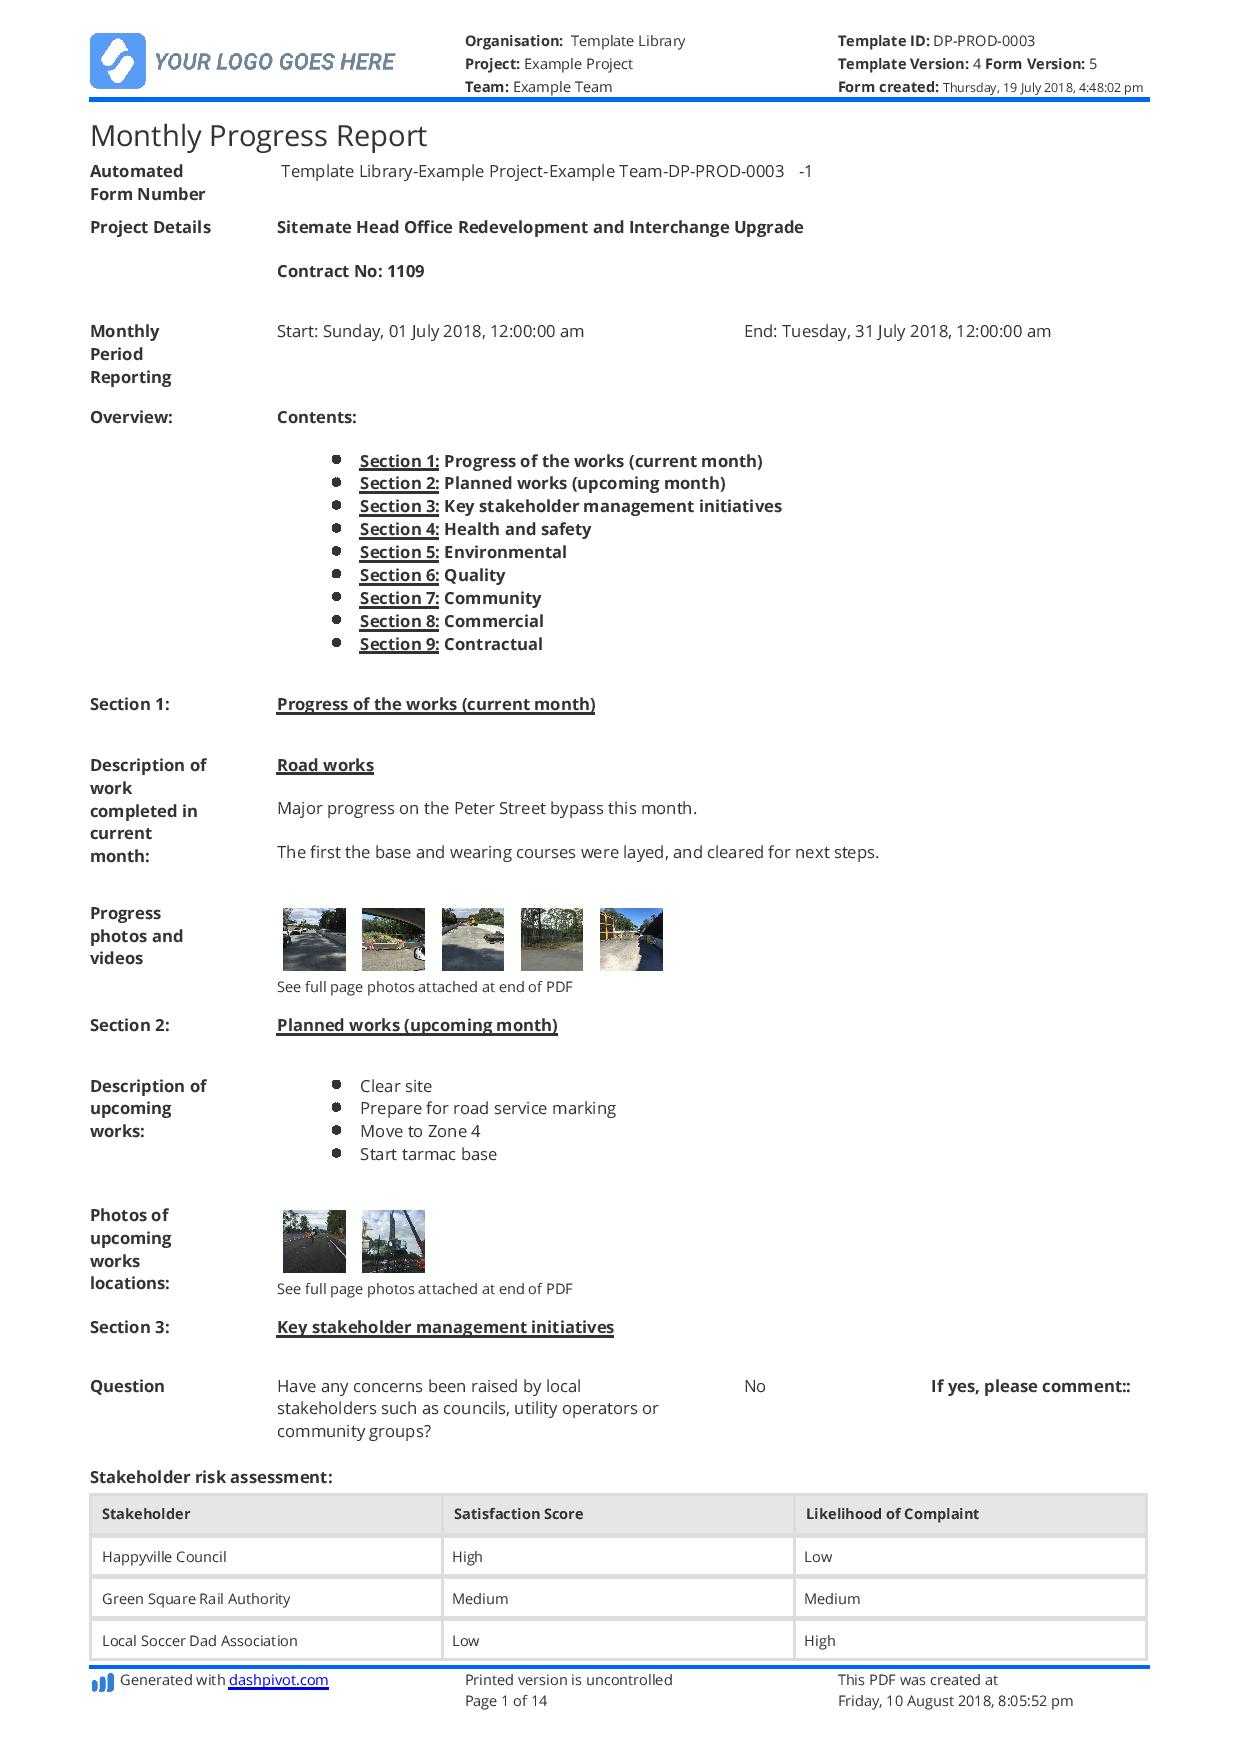 Monthly Construction Progress Report Template: Use This For Monthly Progress Report Template